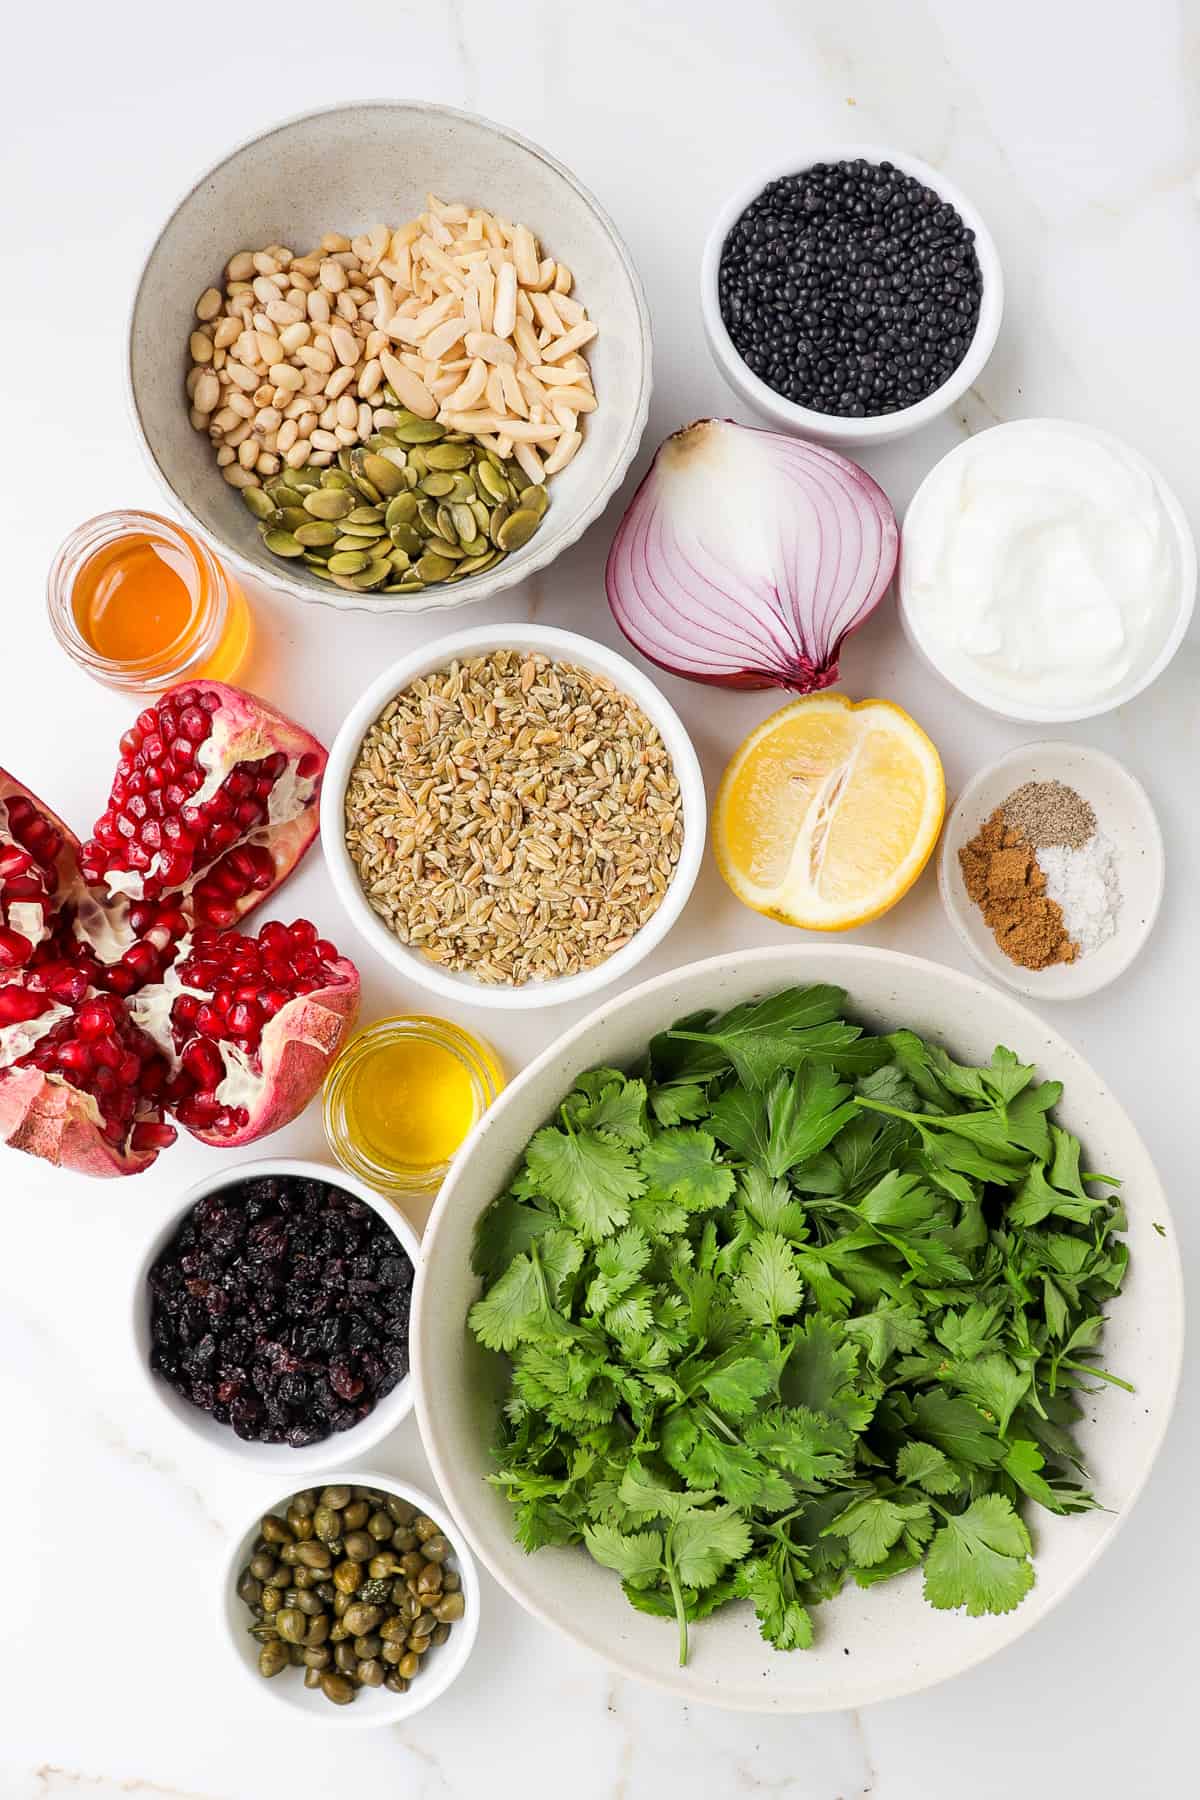 Ingredients shown to make the Cypriot grain salad.